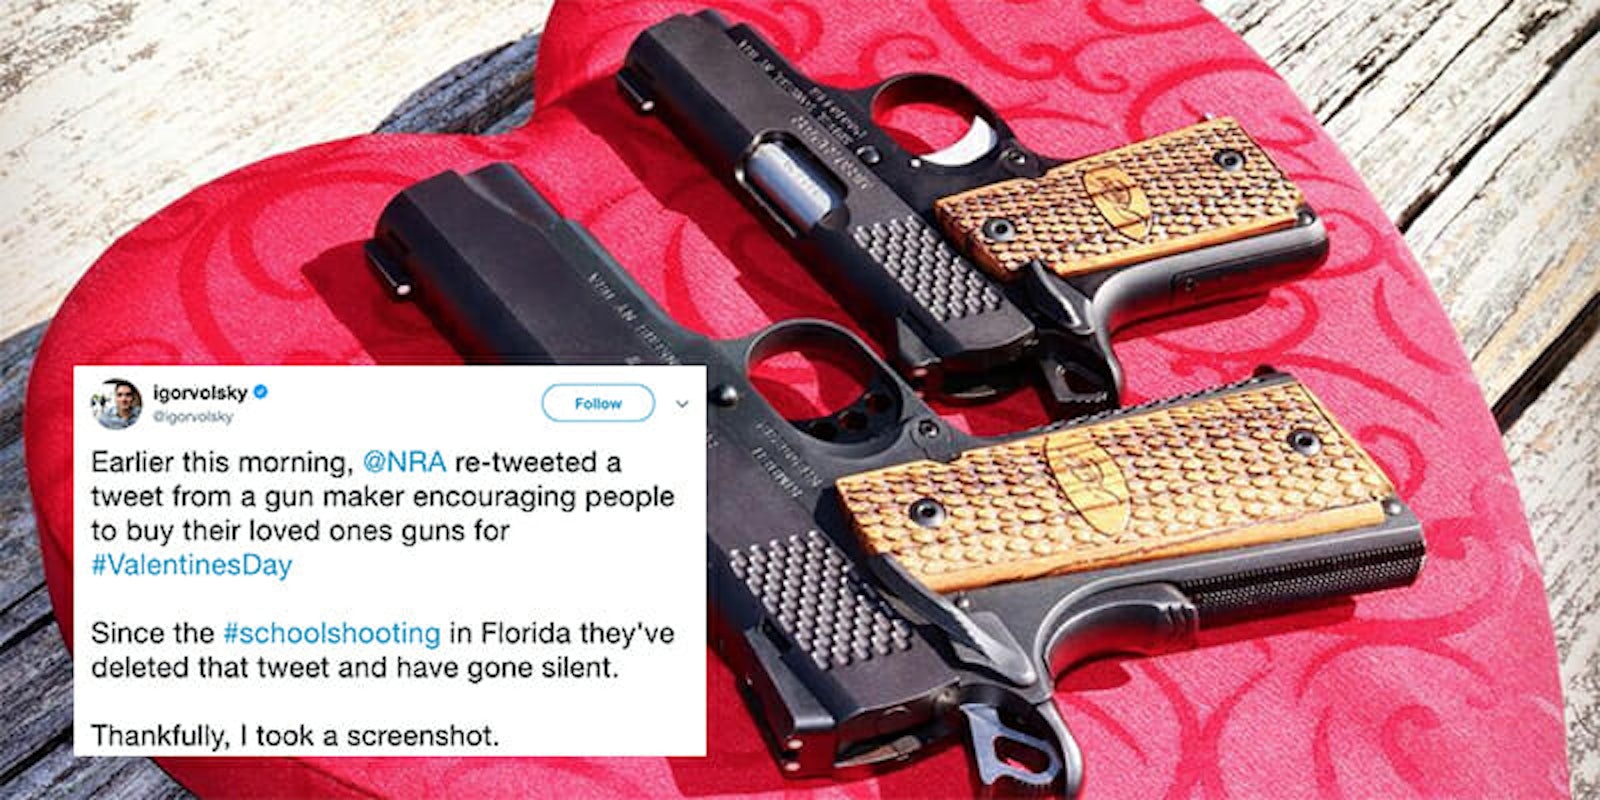 Following news of a school shooting in Florida, the NRA deleted a retweet of a post encouraging people to buy guns for Valentine's Day.